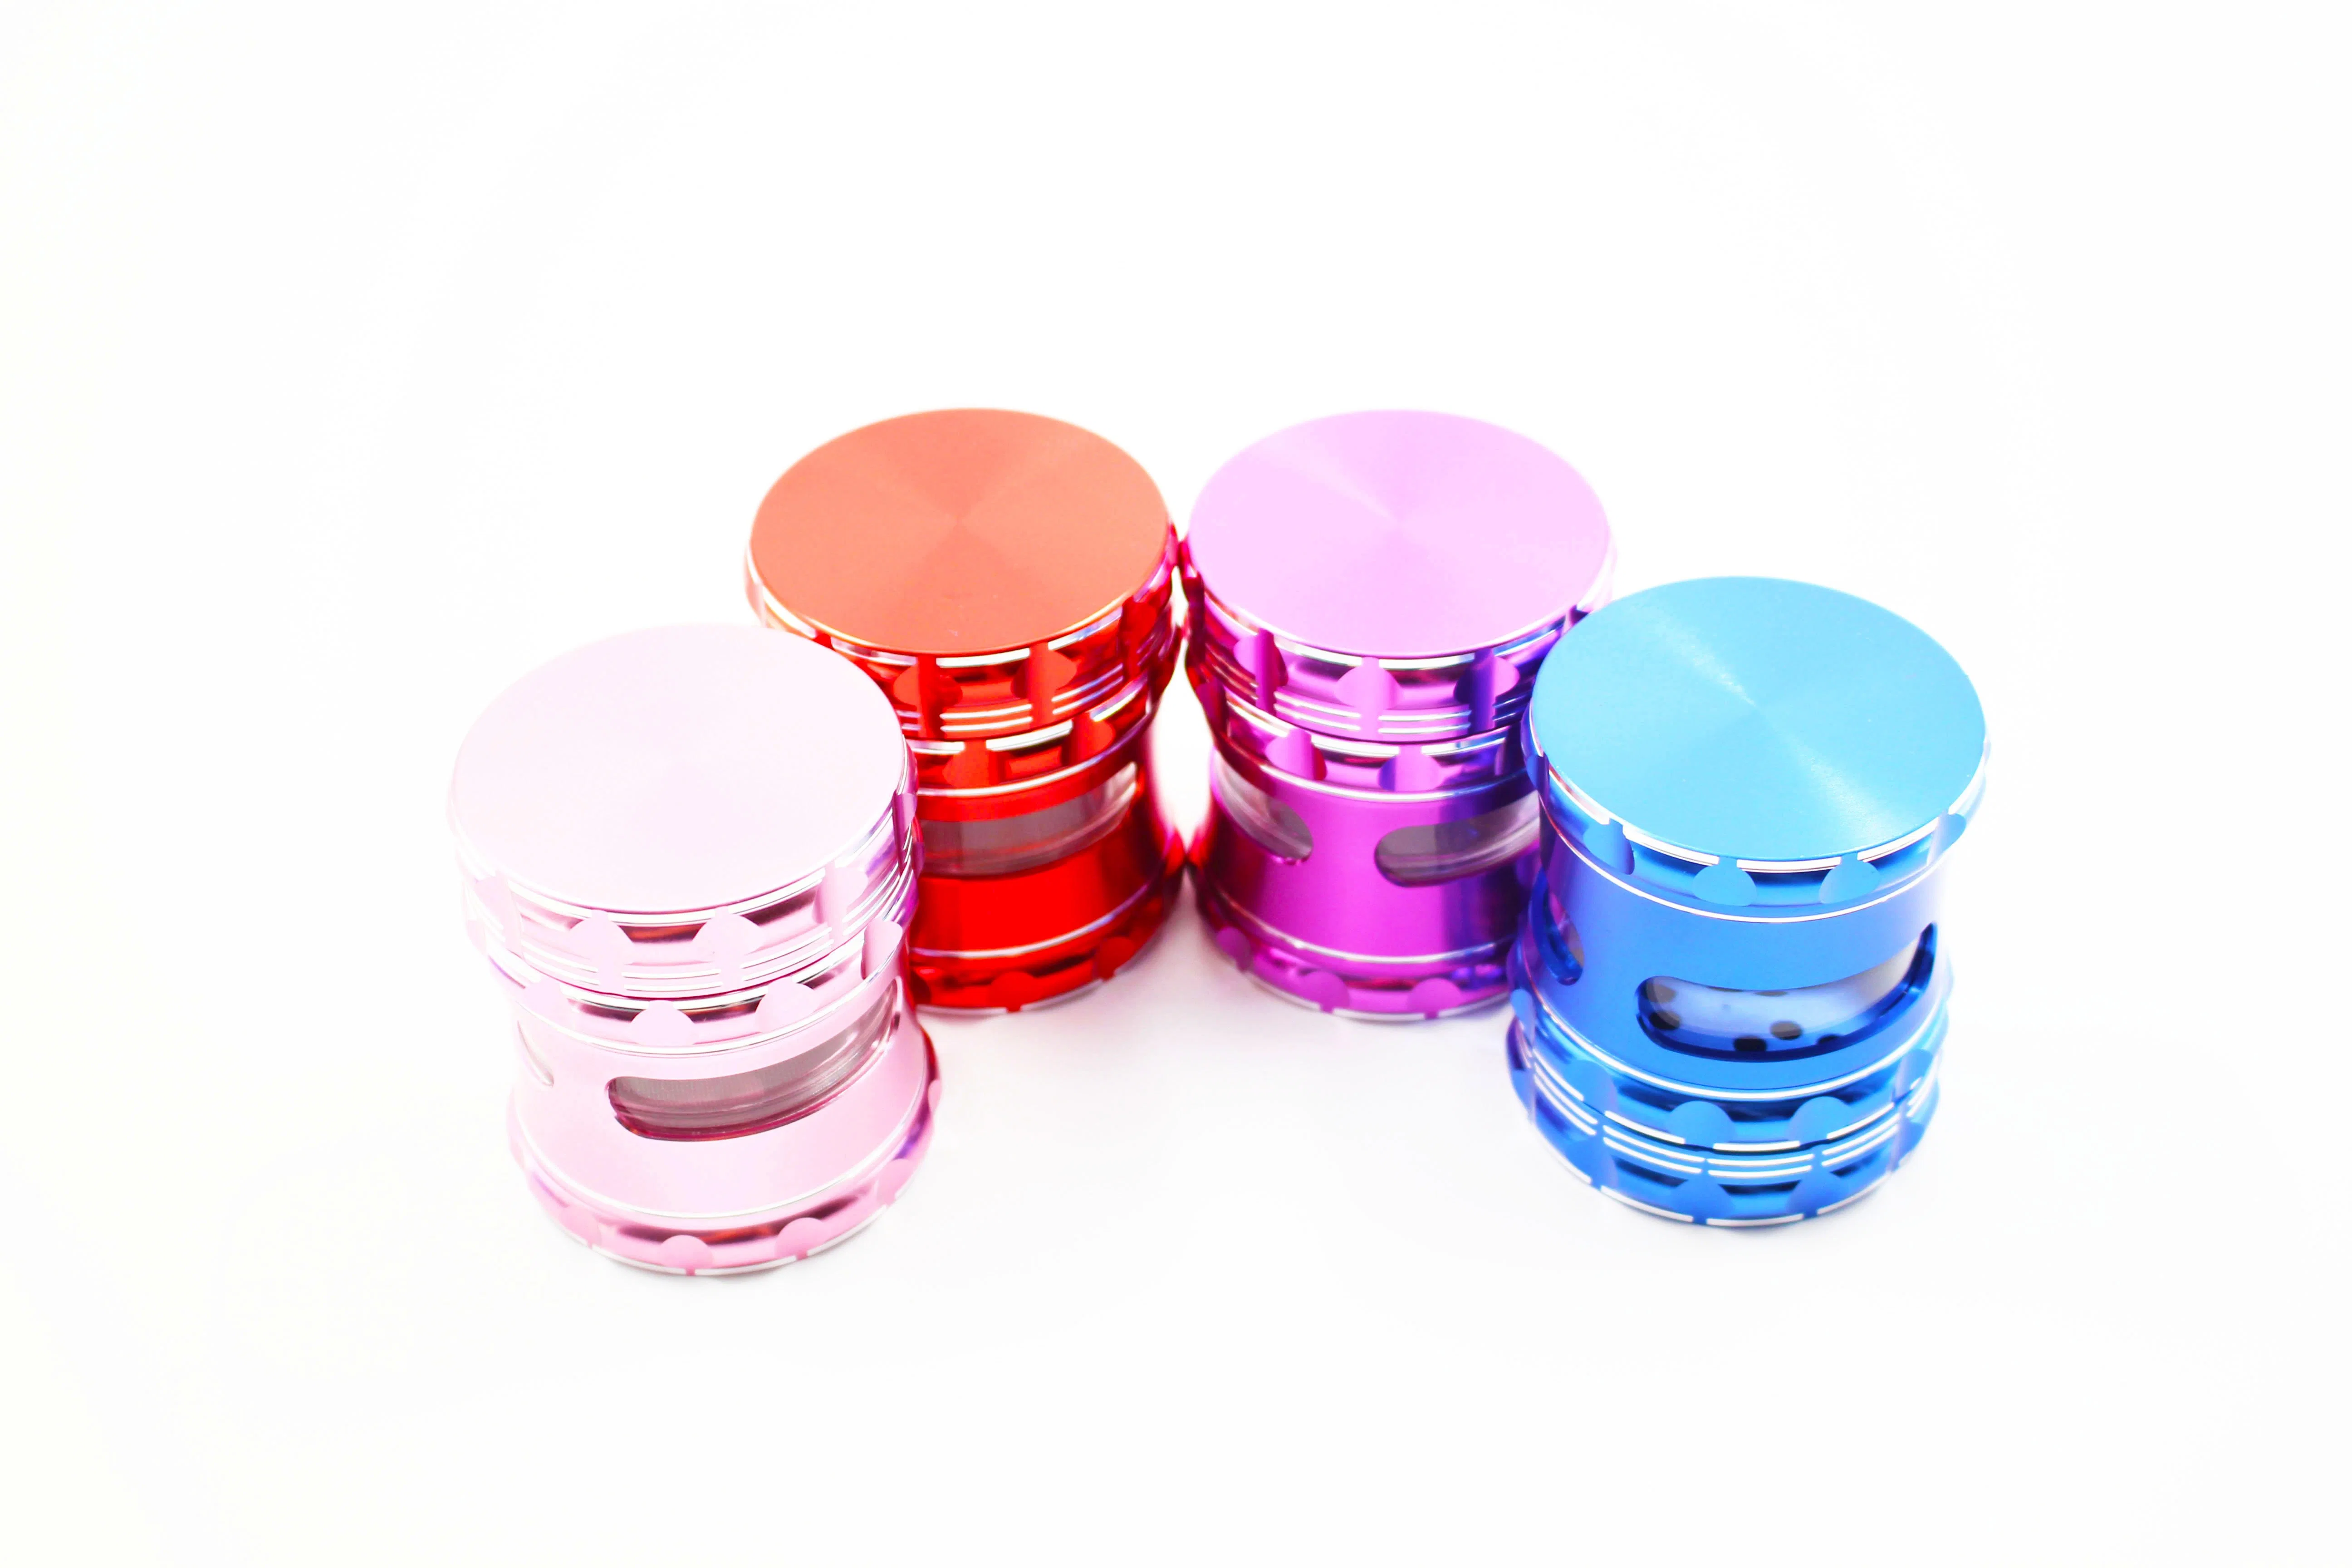 Bros 60mm 4lays Smoking Accessories Colorful Cool New Style Fishion Herb Metal Grinder with Individual Package